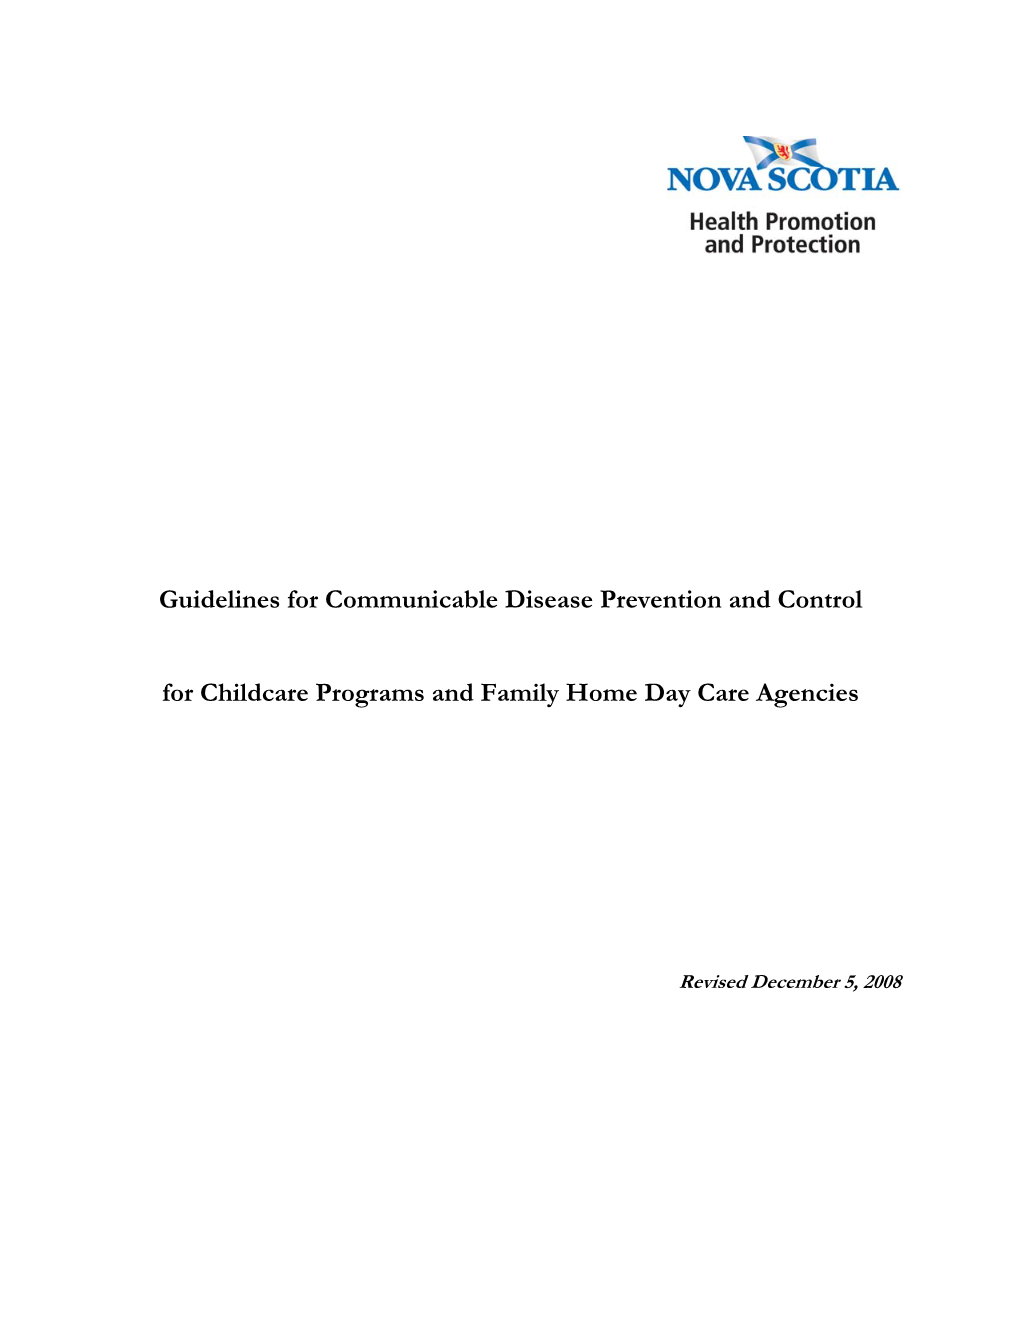 Guidelines for Communicable Disease Prevention and Control for Childcare Programs and Family Home Day Care Agencies